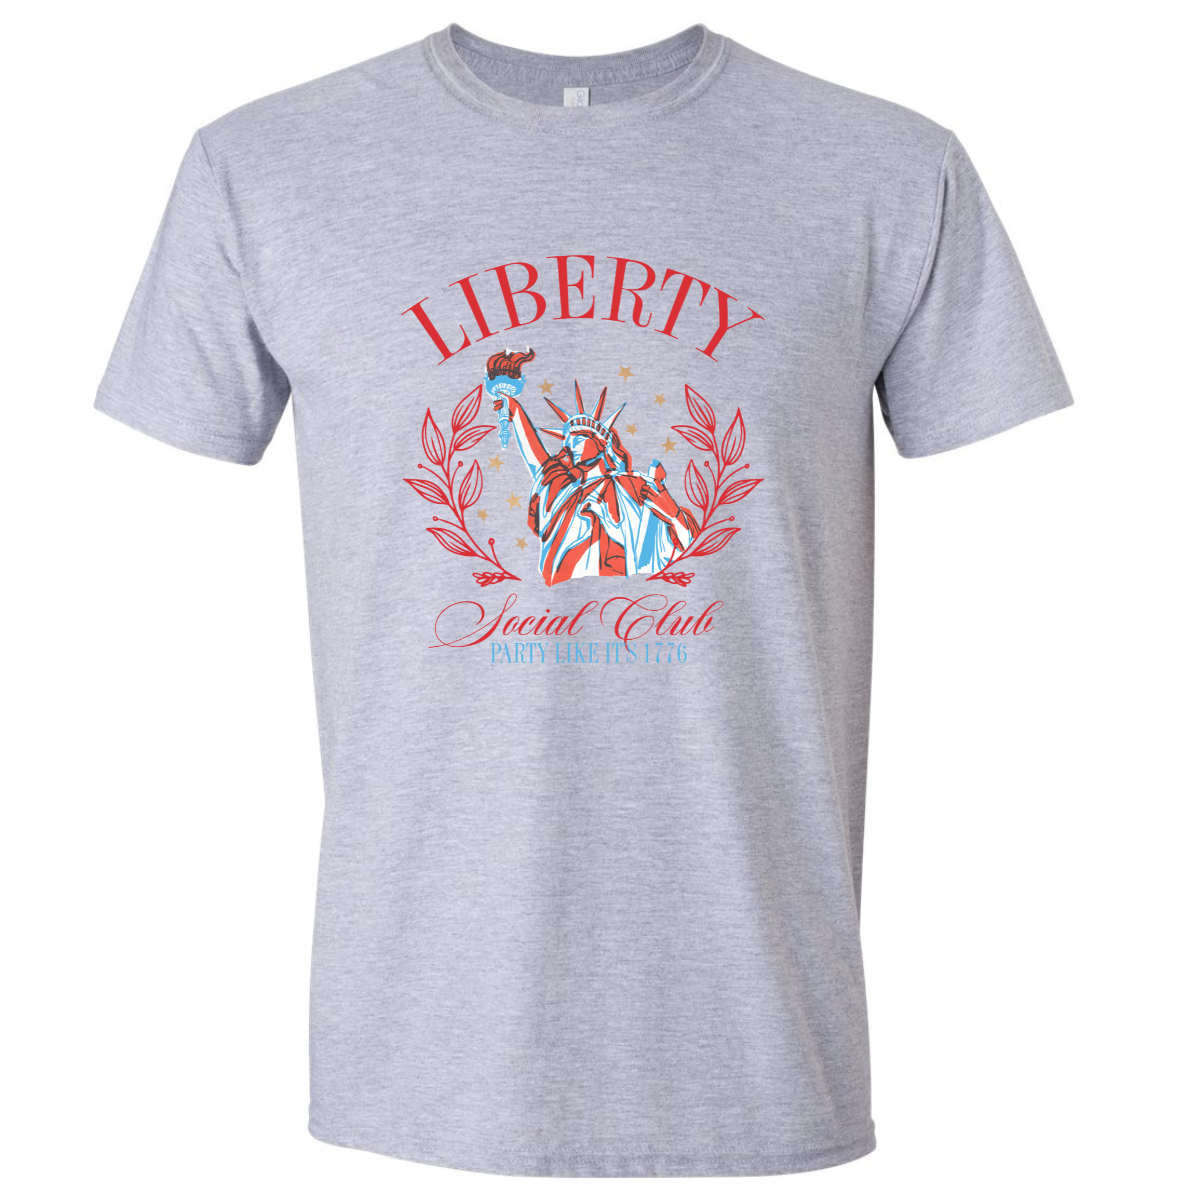 Liberty Social Club, Party Like It's 1766 - July 4th Printed Apparel